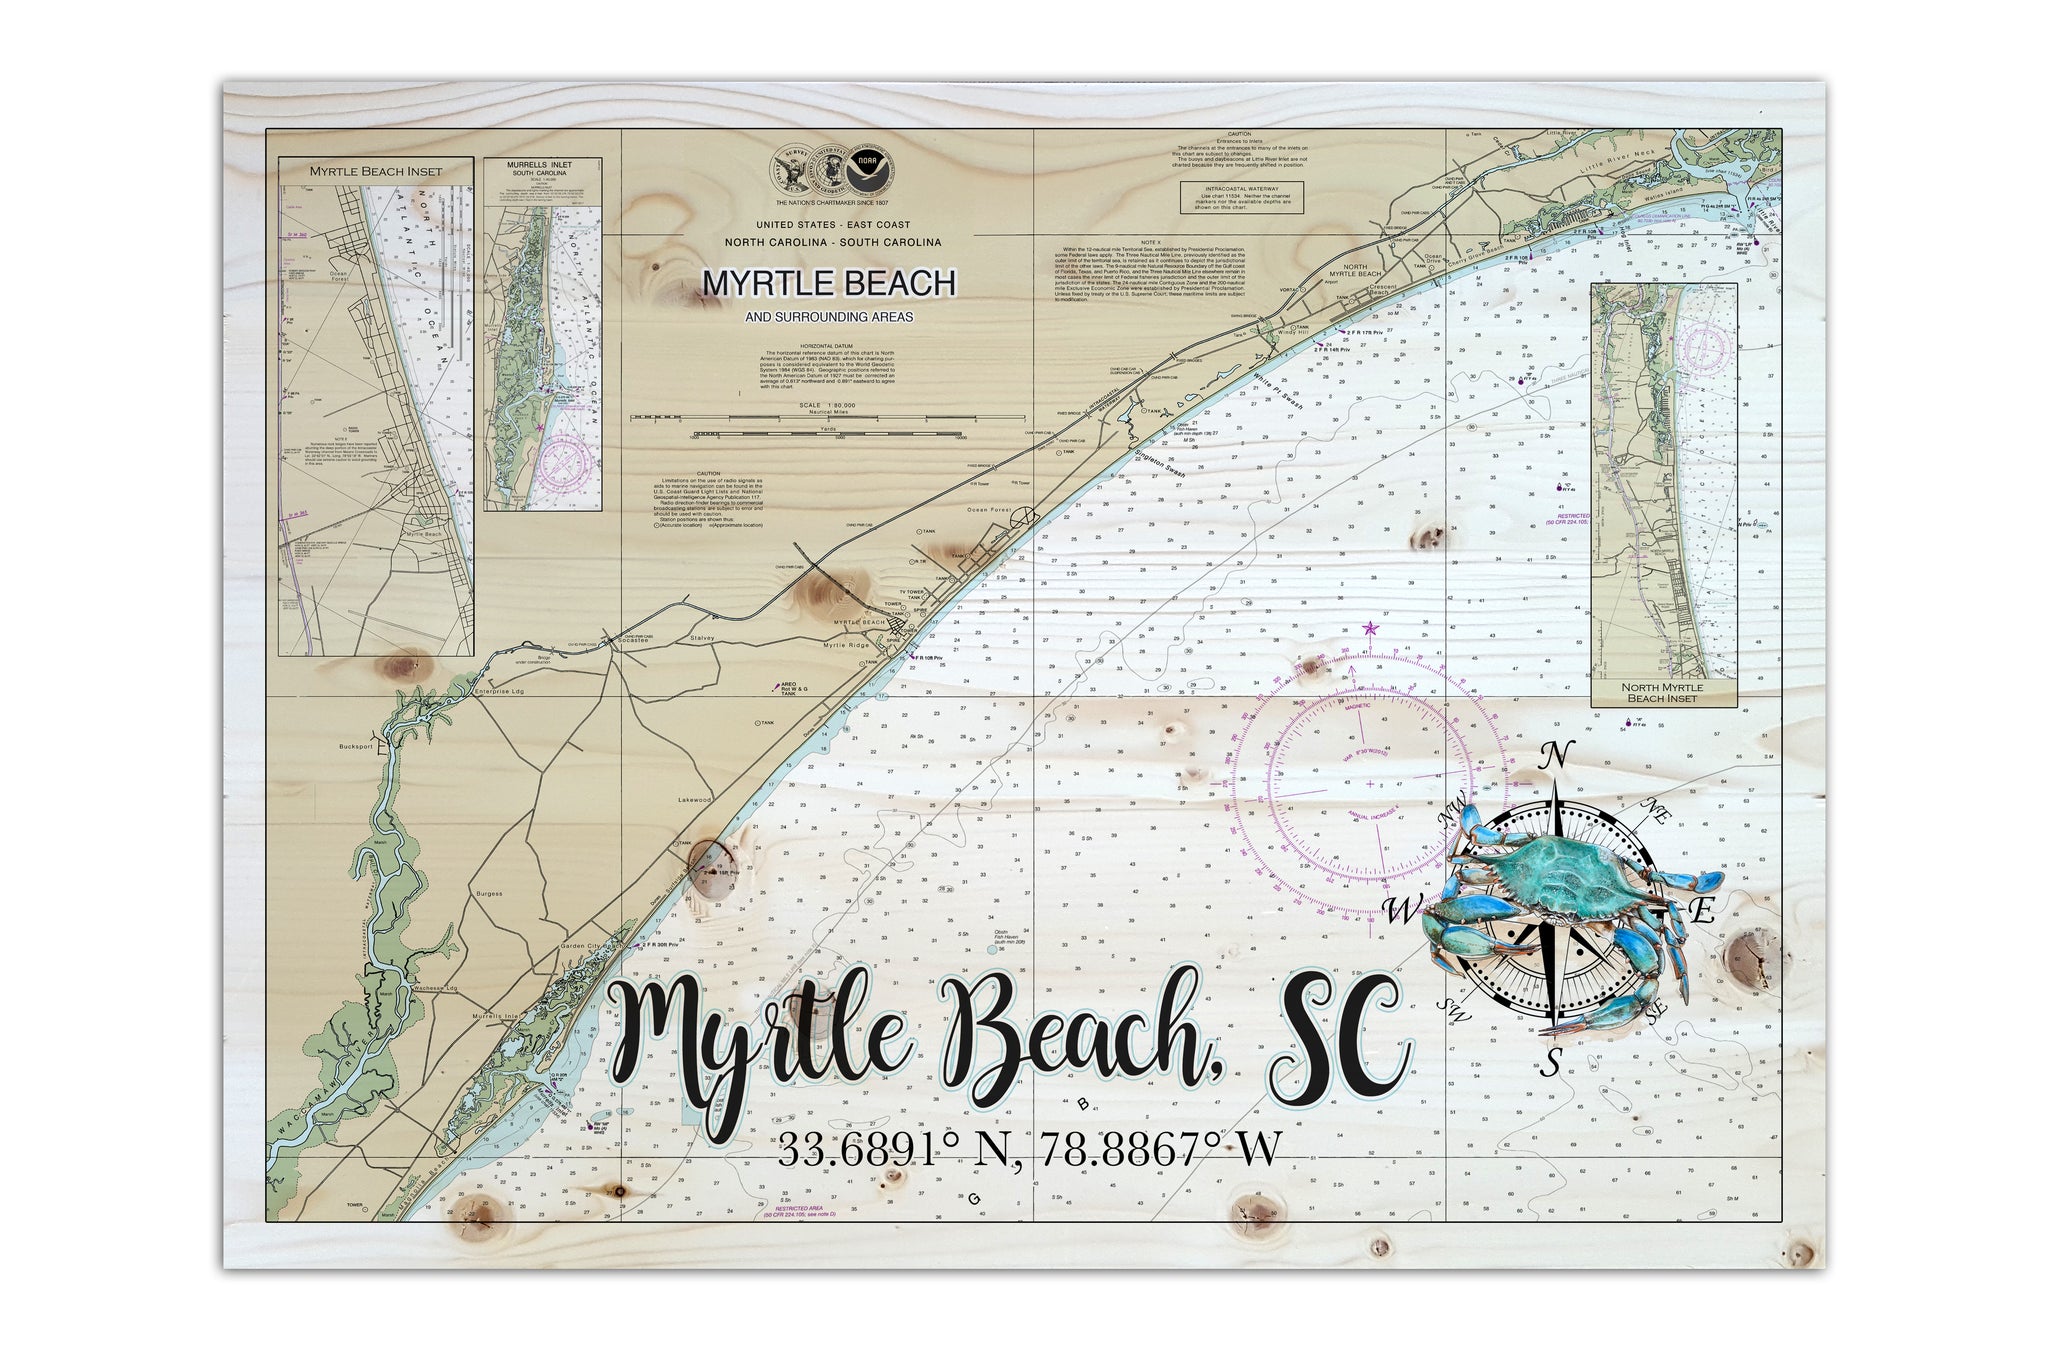 Myrtle Beach, SC with Crab Plank Map